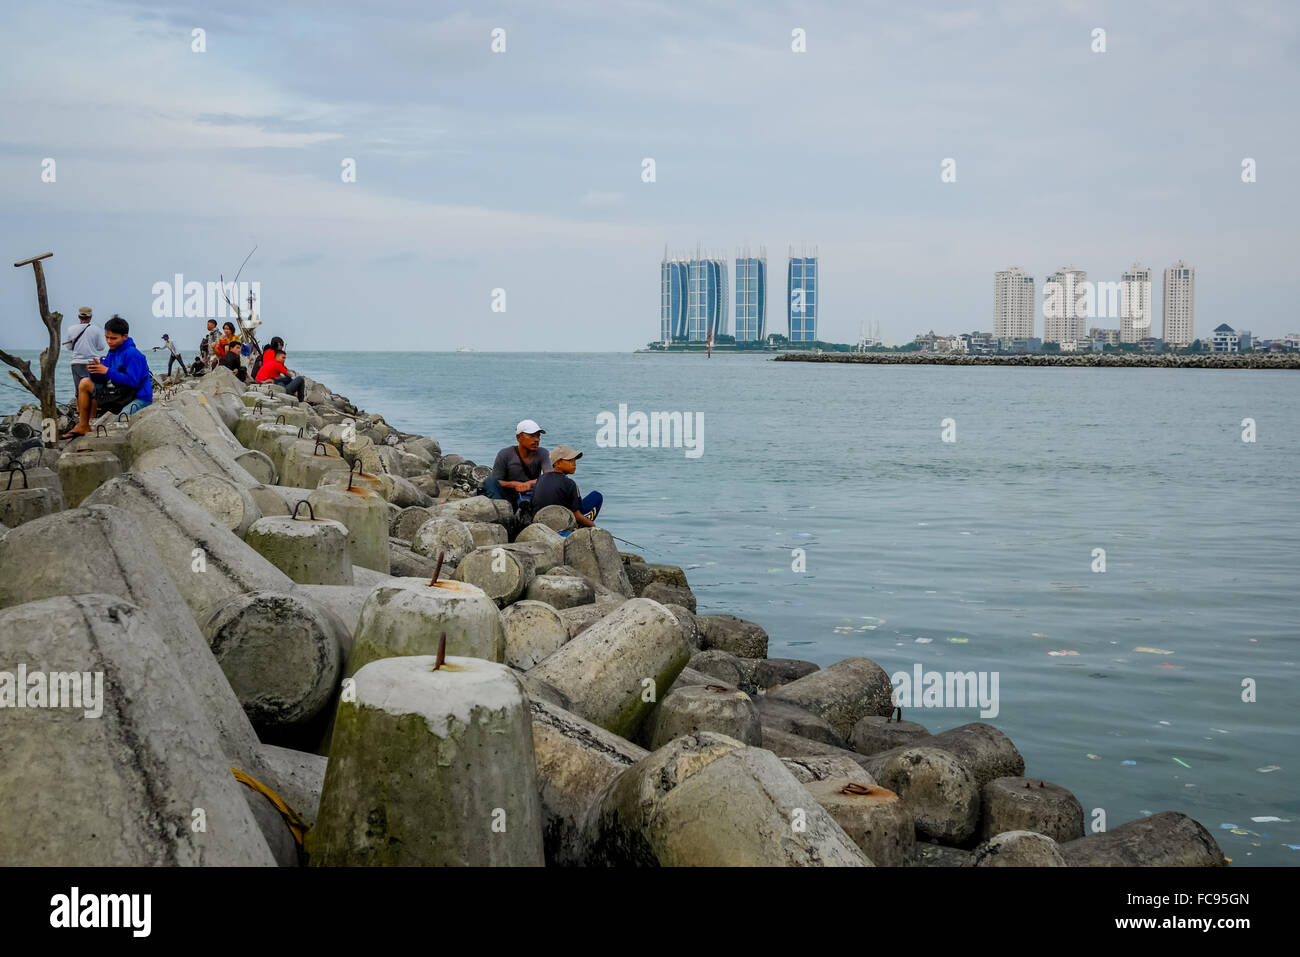 People fishing from tetrapod structures, which are protecting Muara Angke fishing port as wave breaker in Penjaringan, Jakarta, Indonesia. Stock Photo